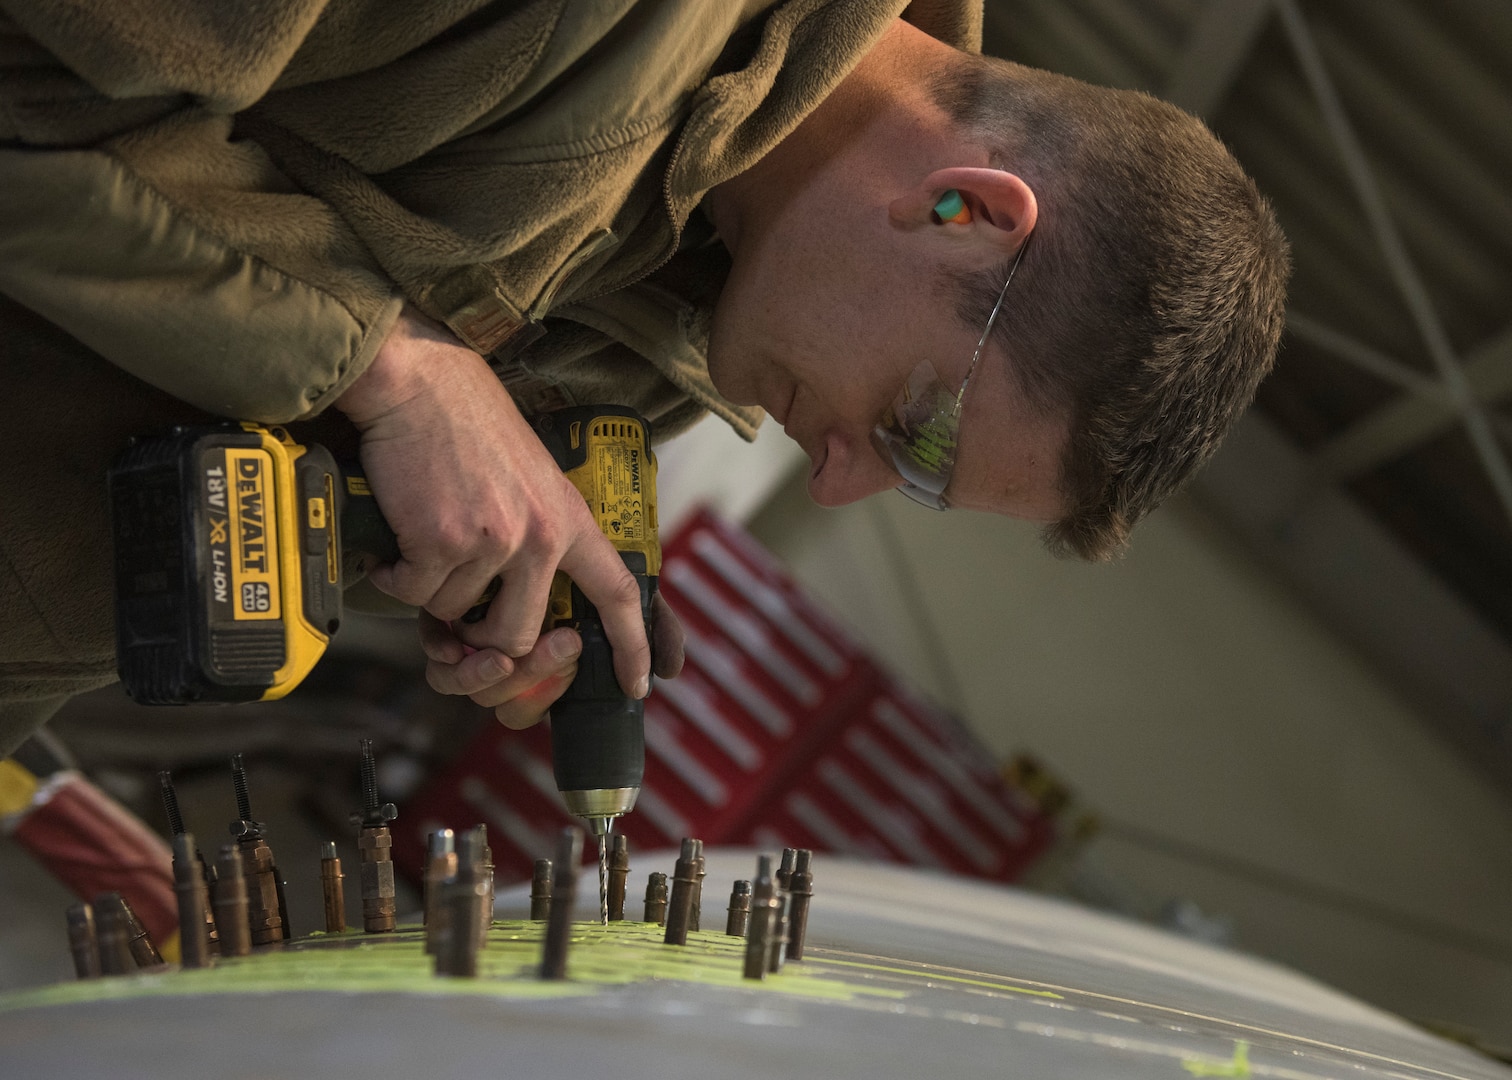 Master Sgt. Andrew Liederbach, 386th Expeditionary Maintenance Squadron combat metals flight chief, inserts temporary placeholders where the rivits will be placed after the permanent patch is complete at an undisclosed location in Southwest Asia, Feb. 6, 2019. When the damage first occurred, Liederbach and his team got their tools and materials together to fly to the aircraft to place a temorary patch on the wing to get it back to base for a permanent repair.